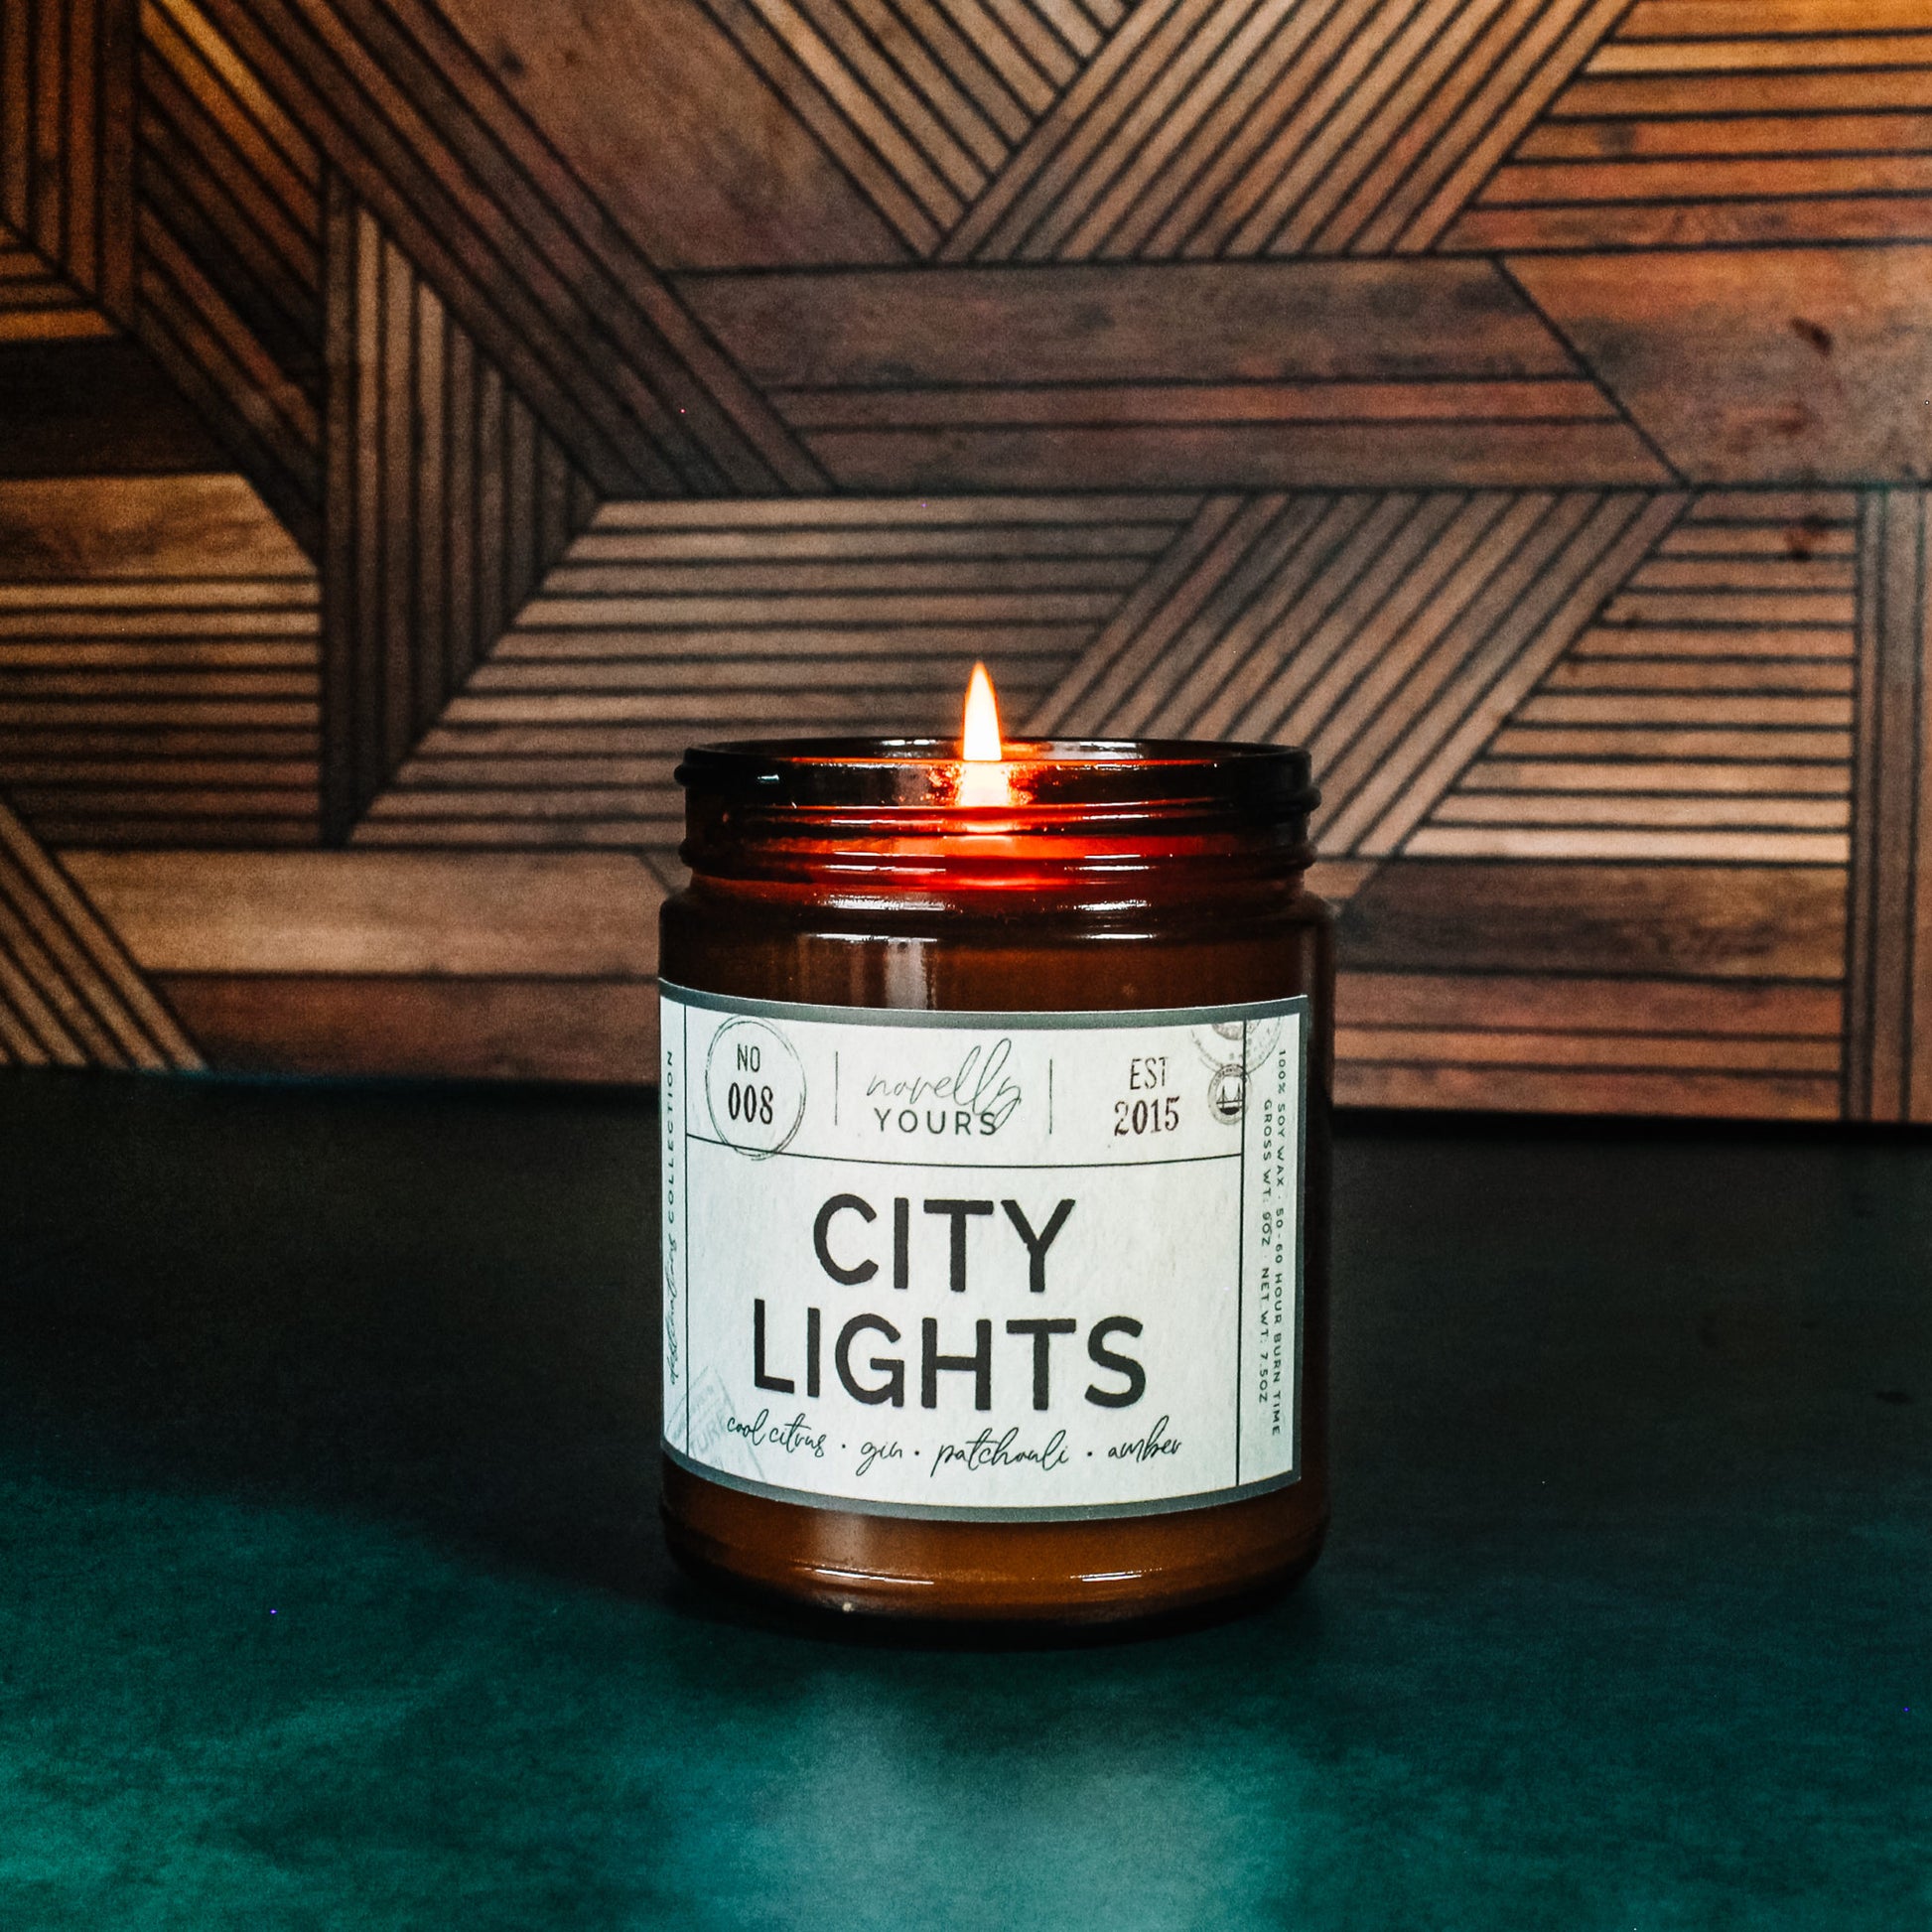 city lights scented soy wax candle in amber jar, lit on jade base with wooden background